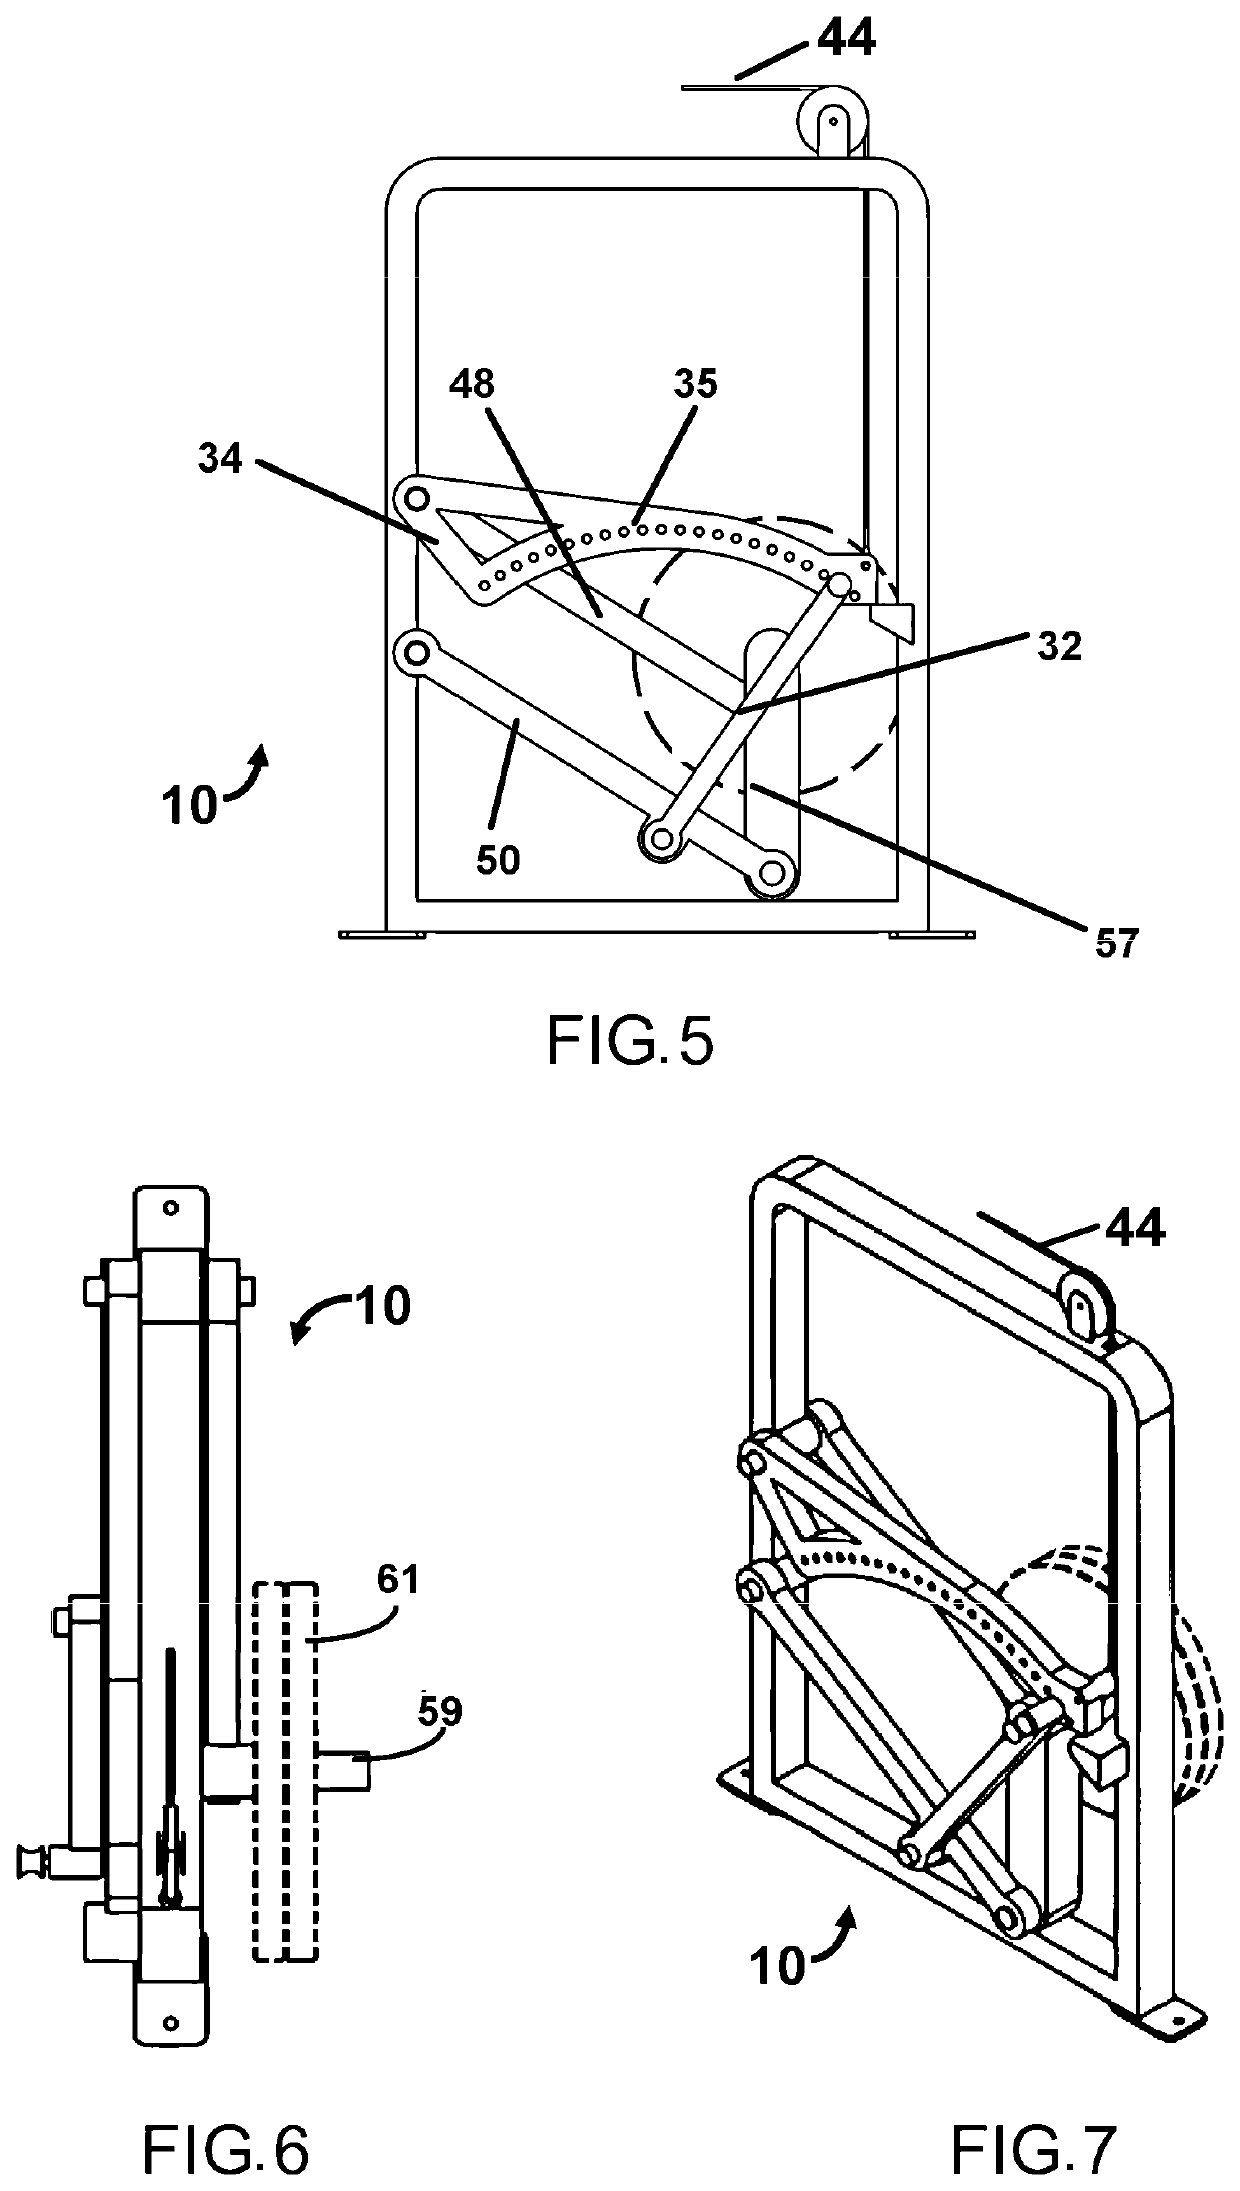 Exercise weight selection device and method